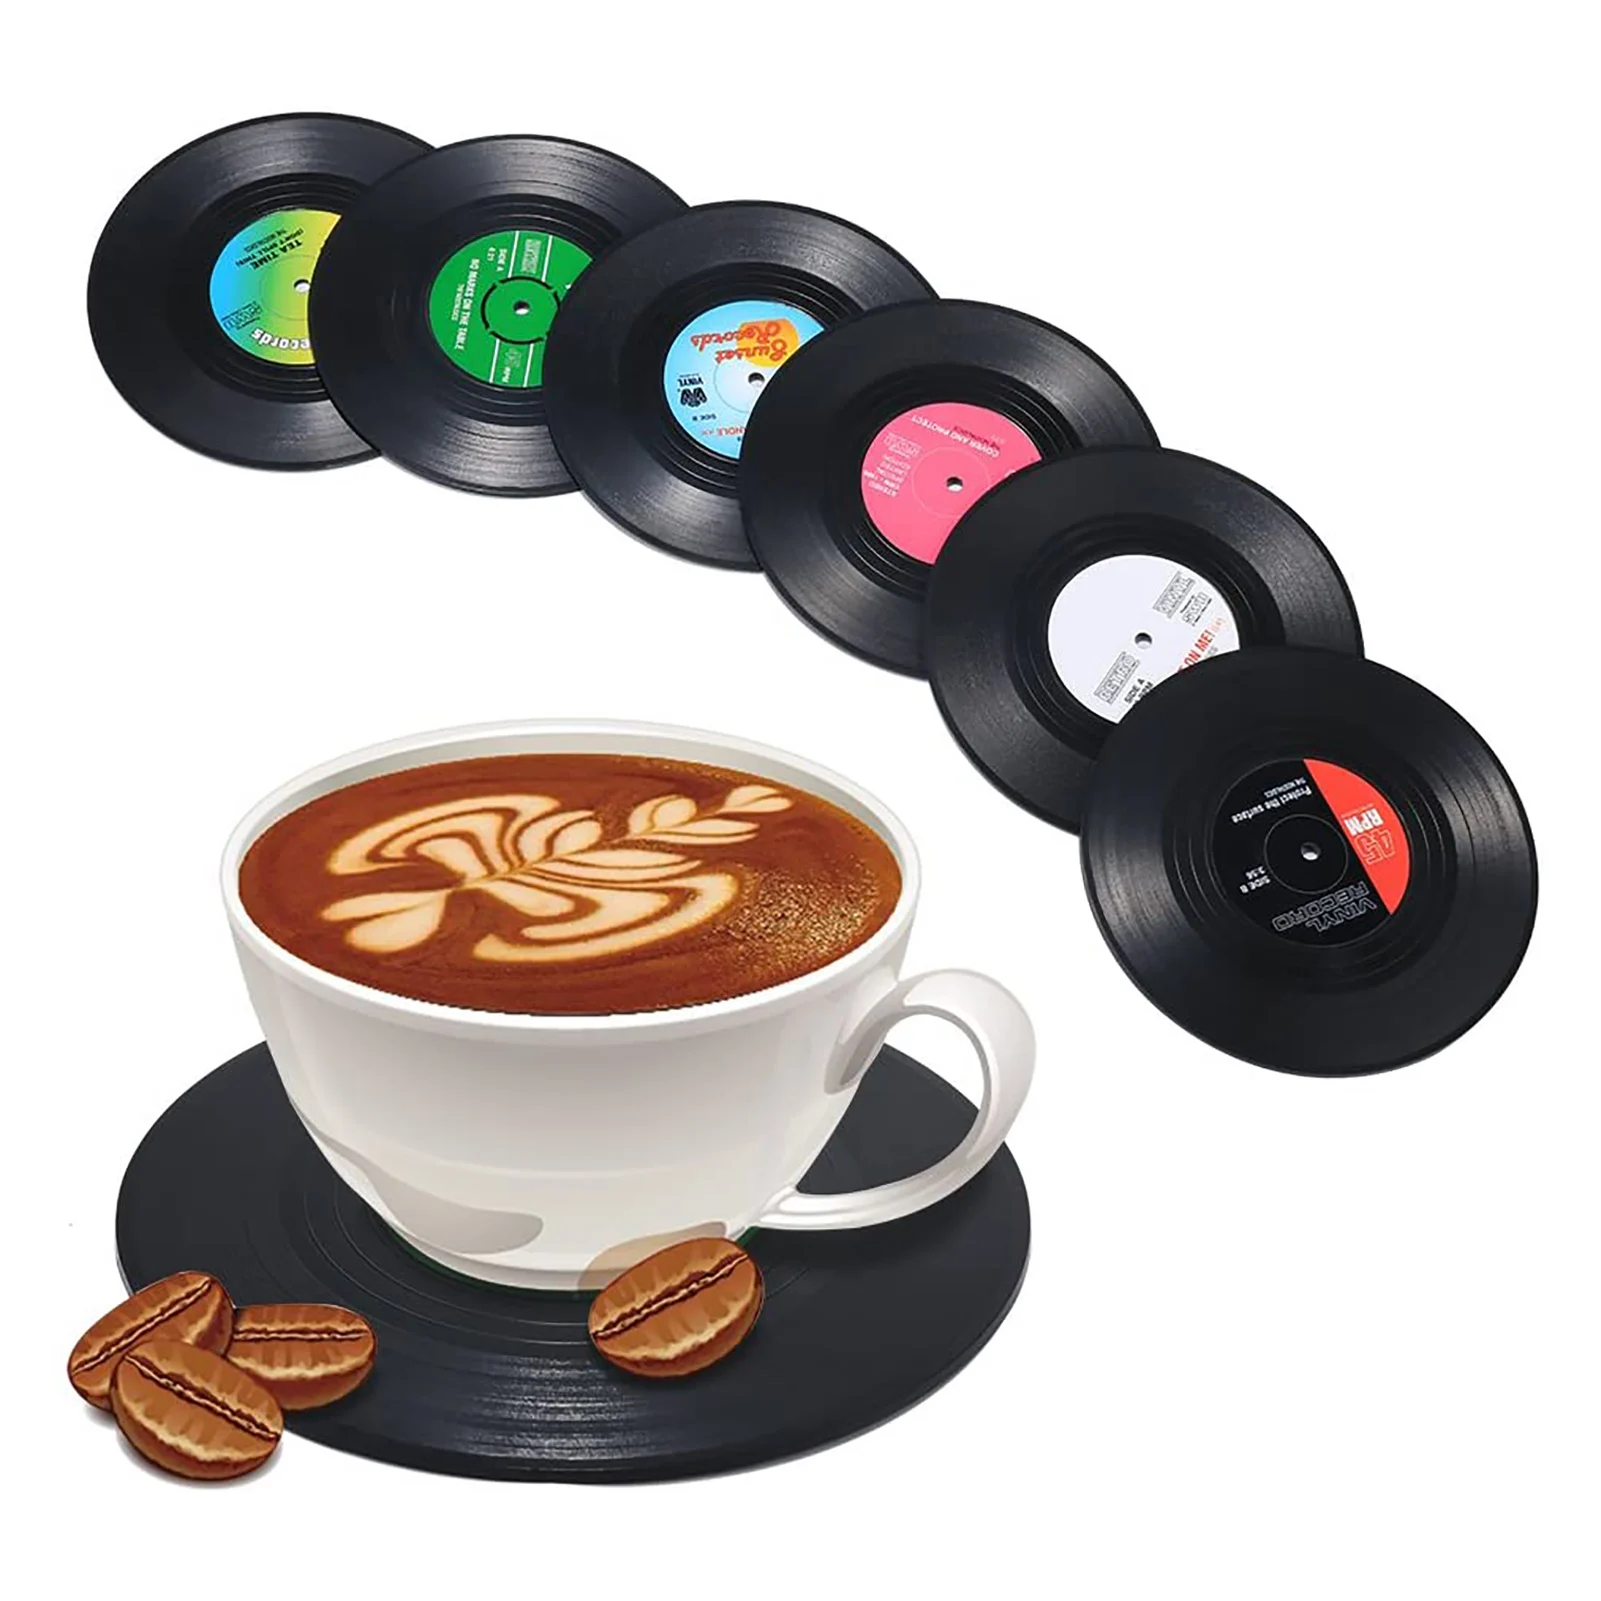 Soft Rubber Cup Coasters for Drinks Set of 10 Vintage Vinyl Record Retro Mats 